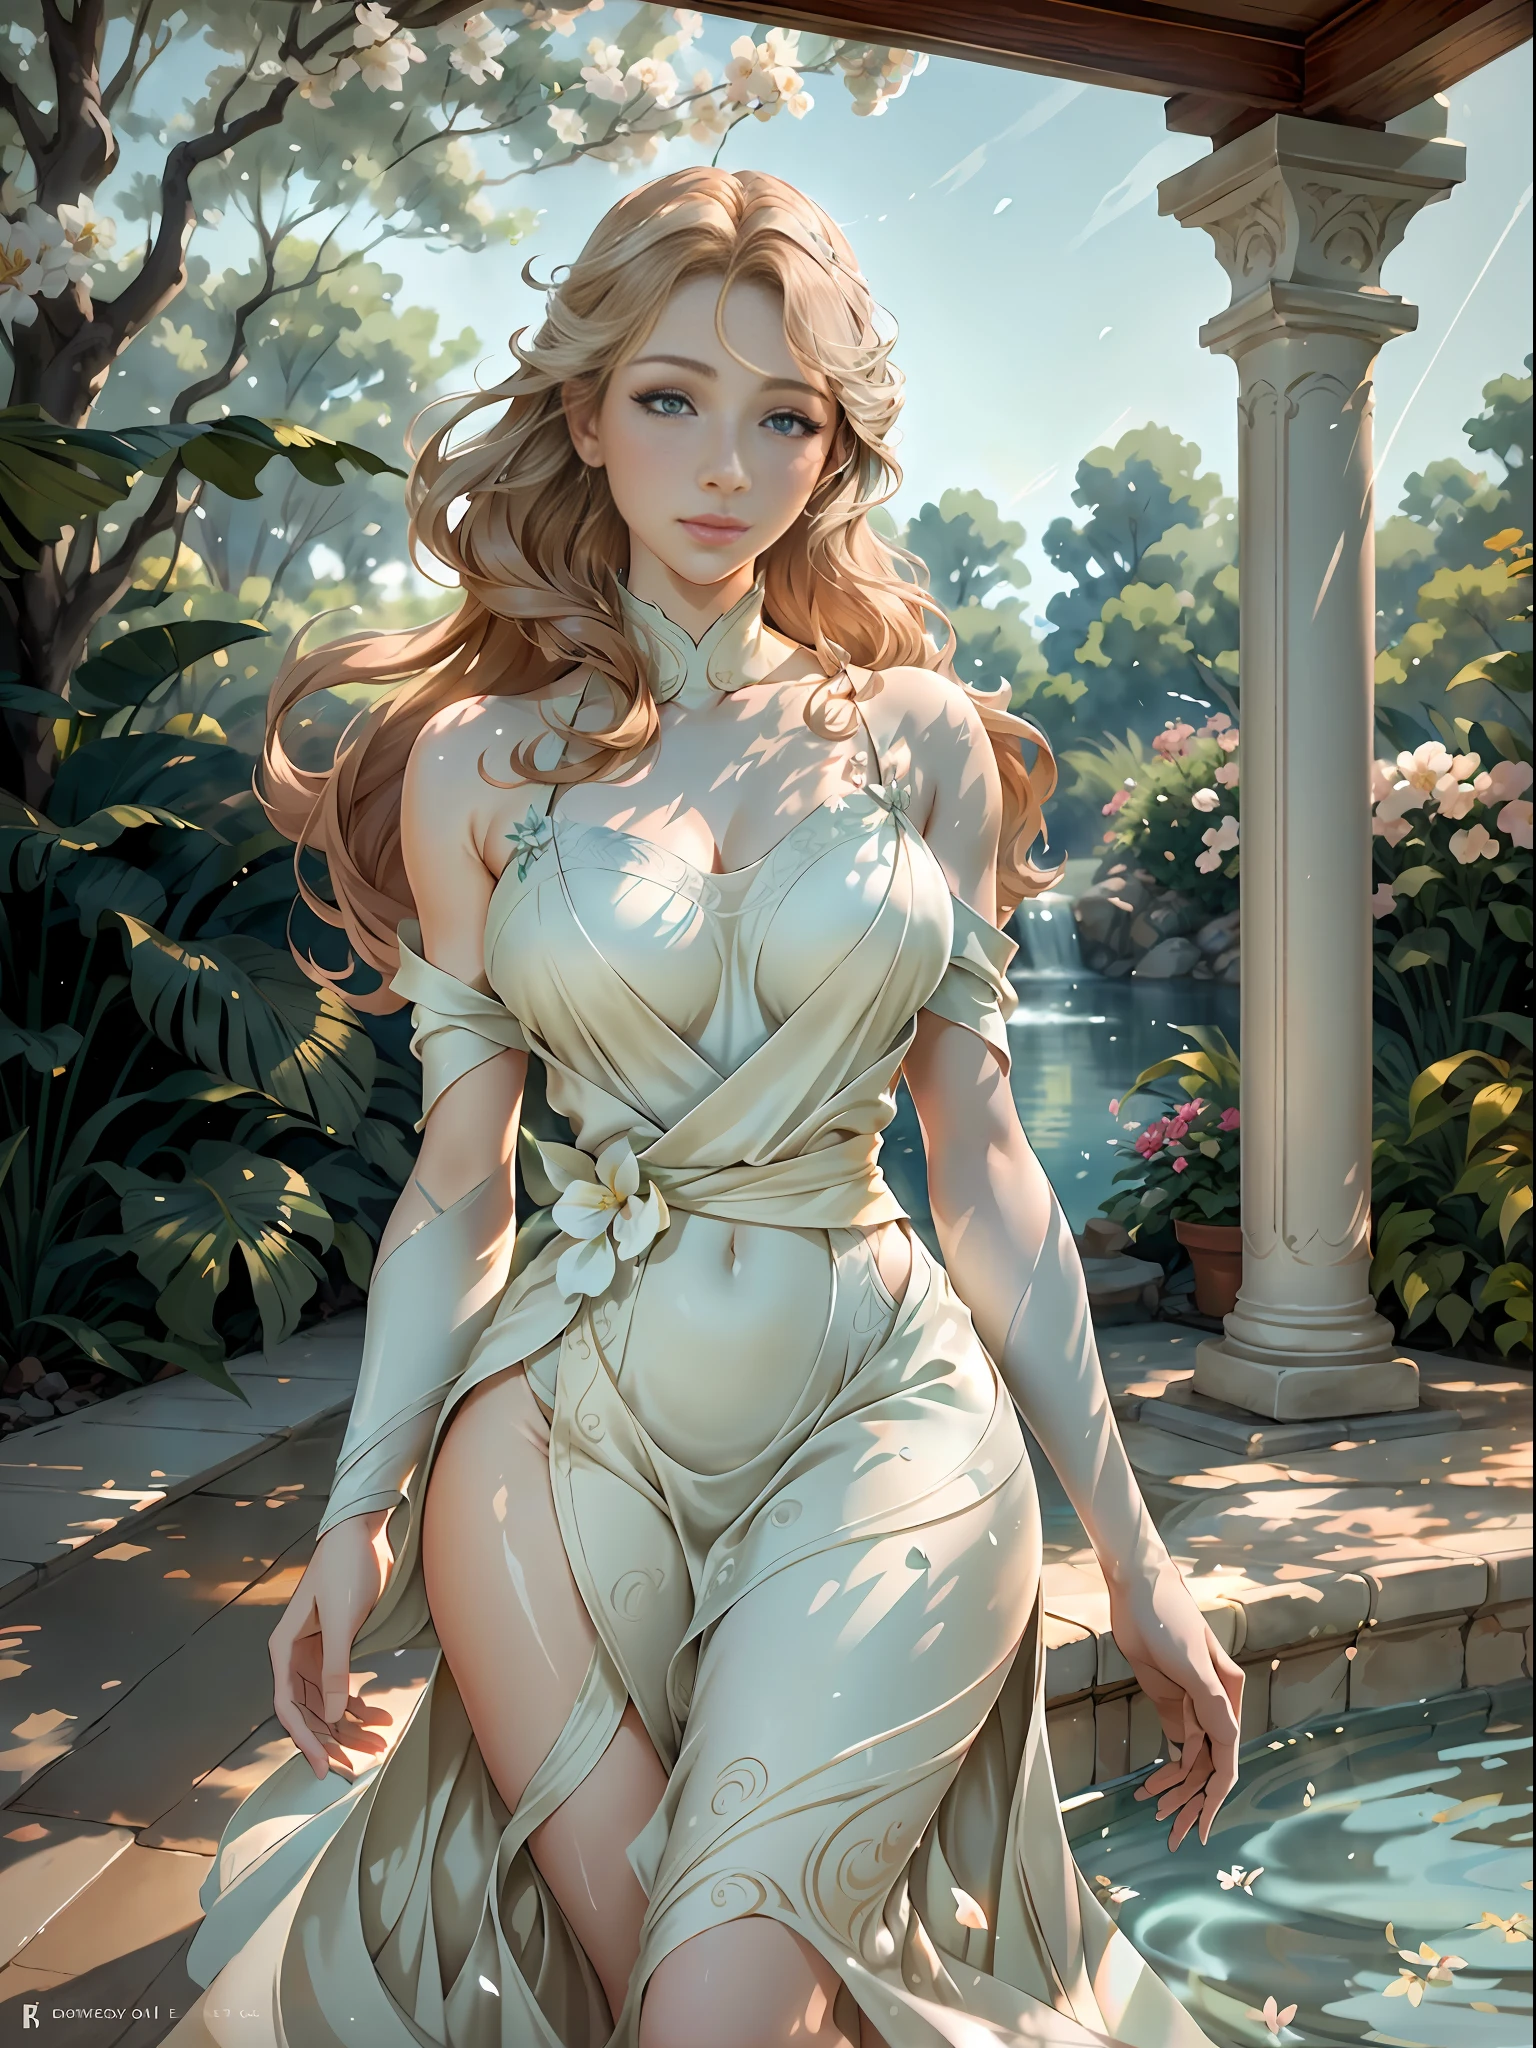 An artistic depiction of a serene scene by the poolside, featuring a beautiful Caucasian girl striking a pose. The girl's porcelain skin glows in the warm sunlight, her auburn hair flowing freely, her blue eyes have long eyelashes. She wears a flowing, ethereal white dress that dances with the wind. The pool area is adorned with elegant sculptures and colorful flowers, creating an atmosphere of sophistication and tranquility. The image is rendered in a dreamy watercolor style, with soft pastel hues and gentle brushstrokes that evoke a sense of calm and serenity.